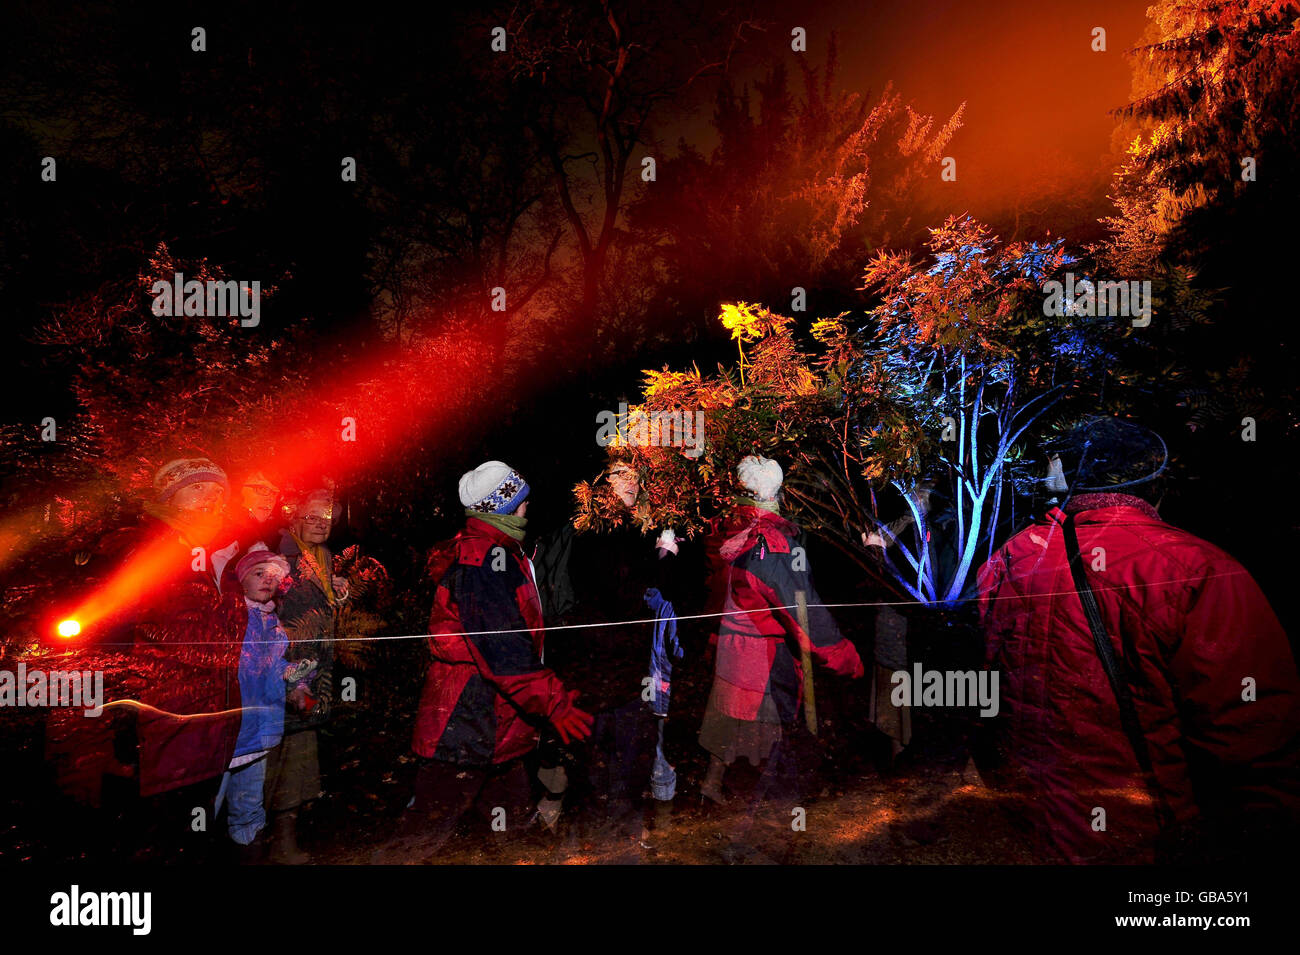 NOTE: MULTIPLE FLASH USED TO CREATE ILLUSION OF CROWDS AND MOVEMENT. People enjoy the festive light show at Westonbirt Arboretum, Gloucester. Stock Photo